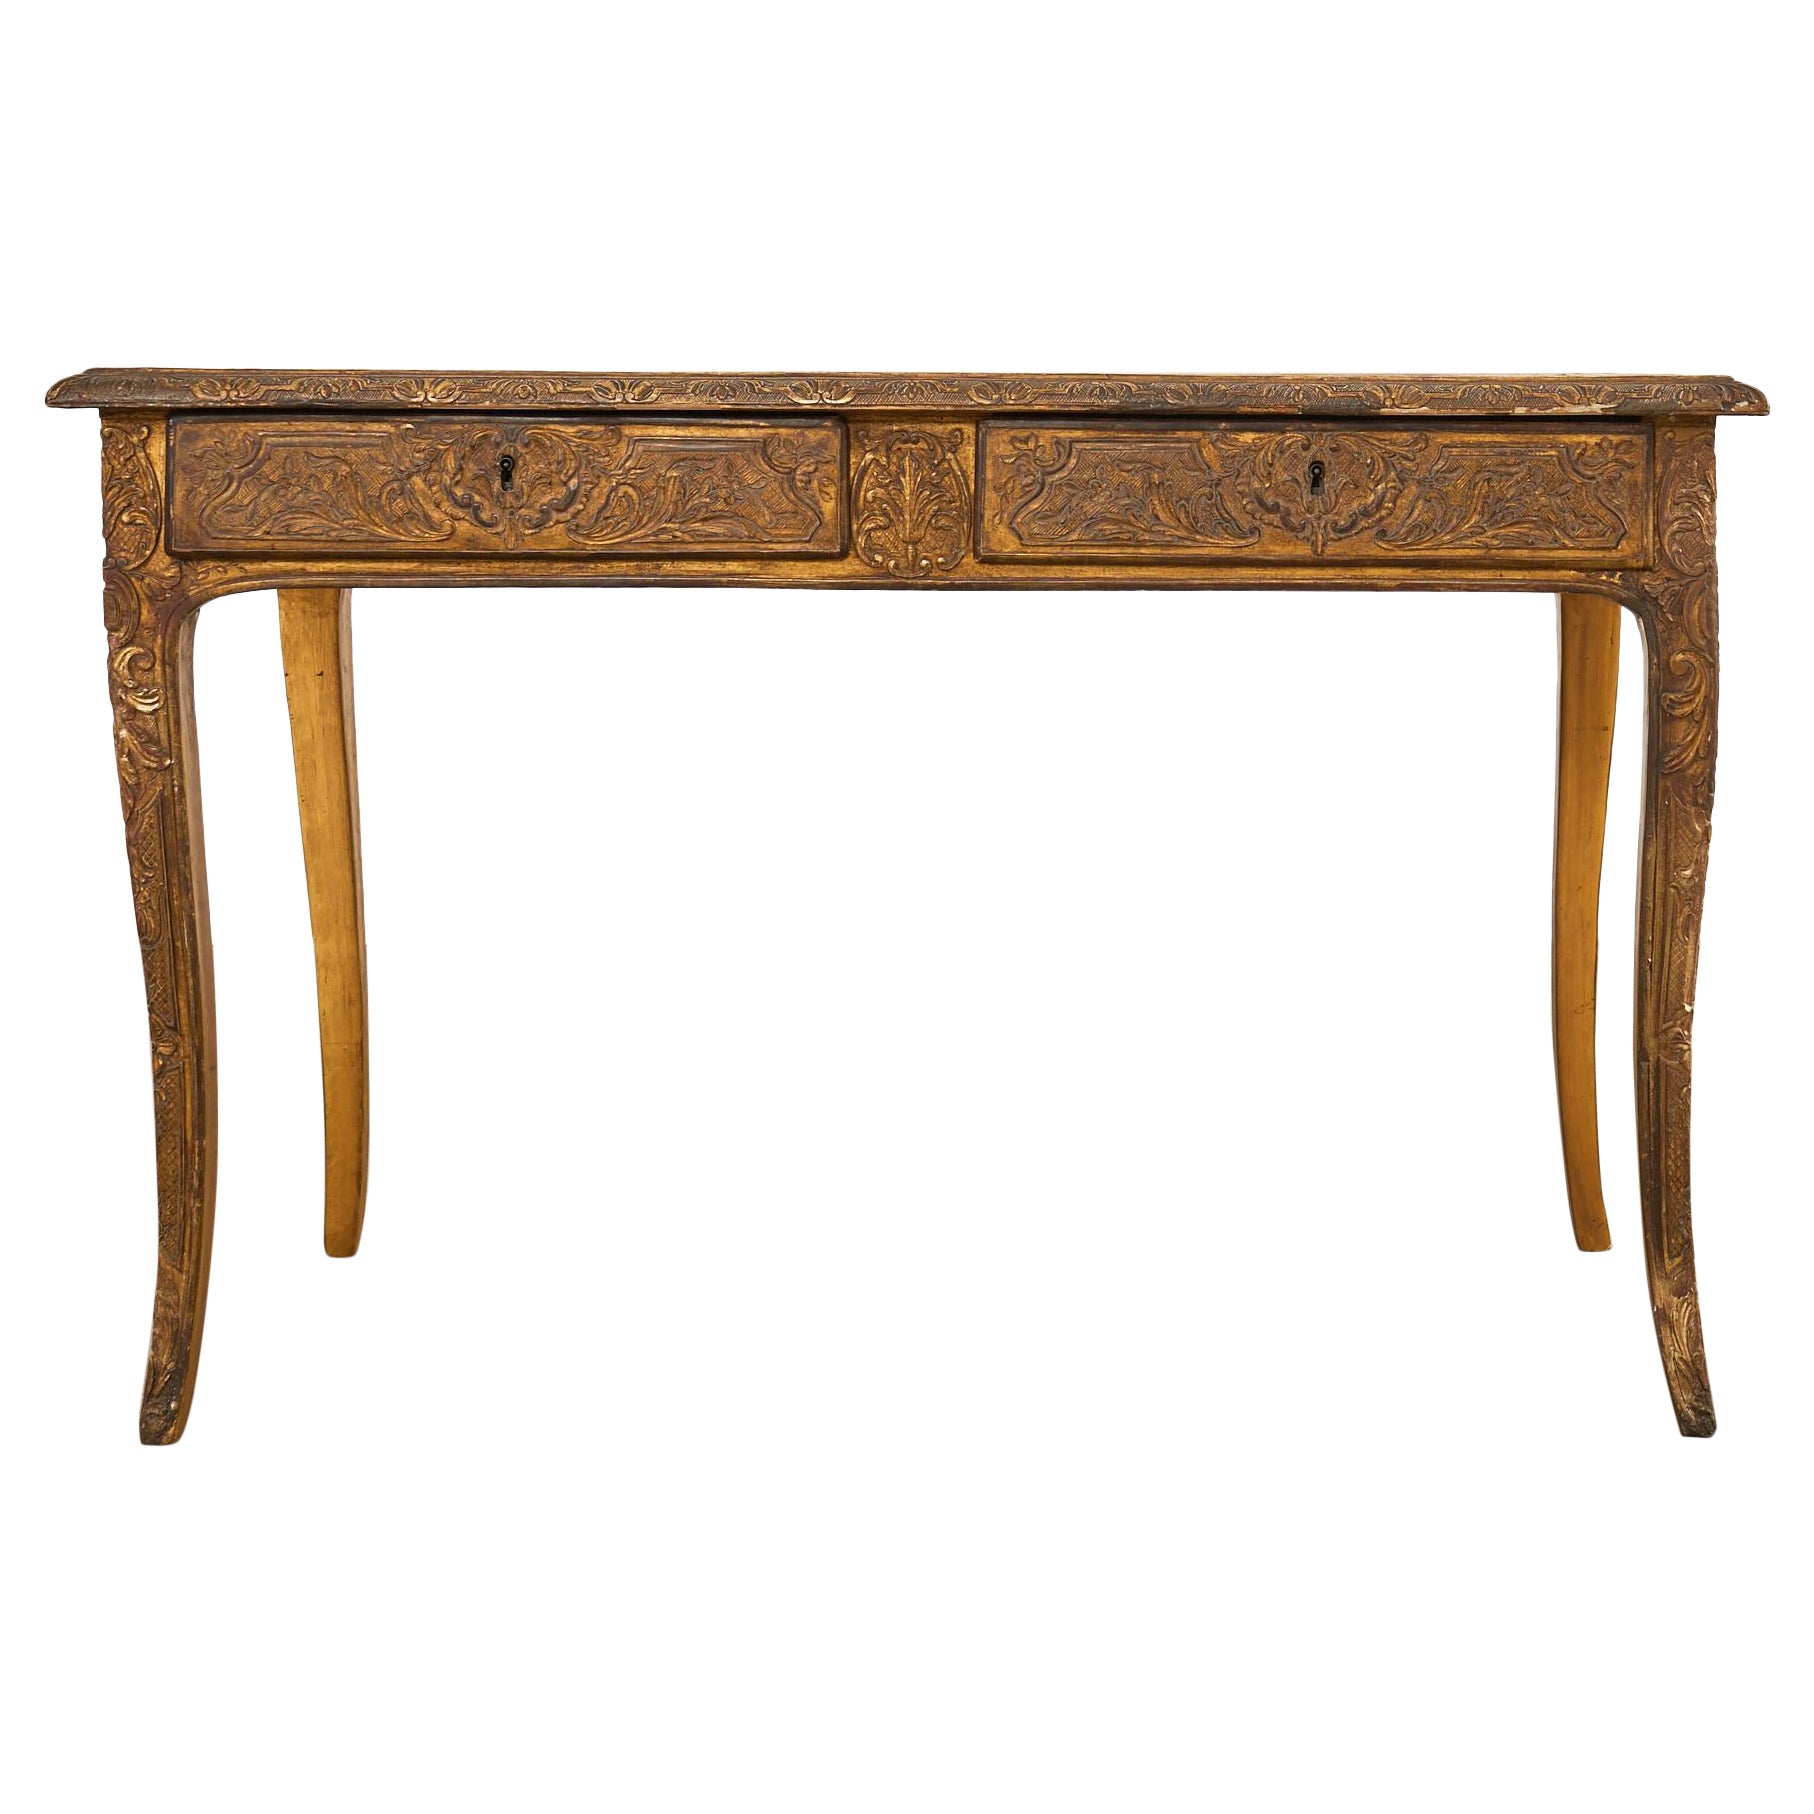 19th Century Louis XV Style Gilt Carved Writing Table Desk For Sale